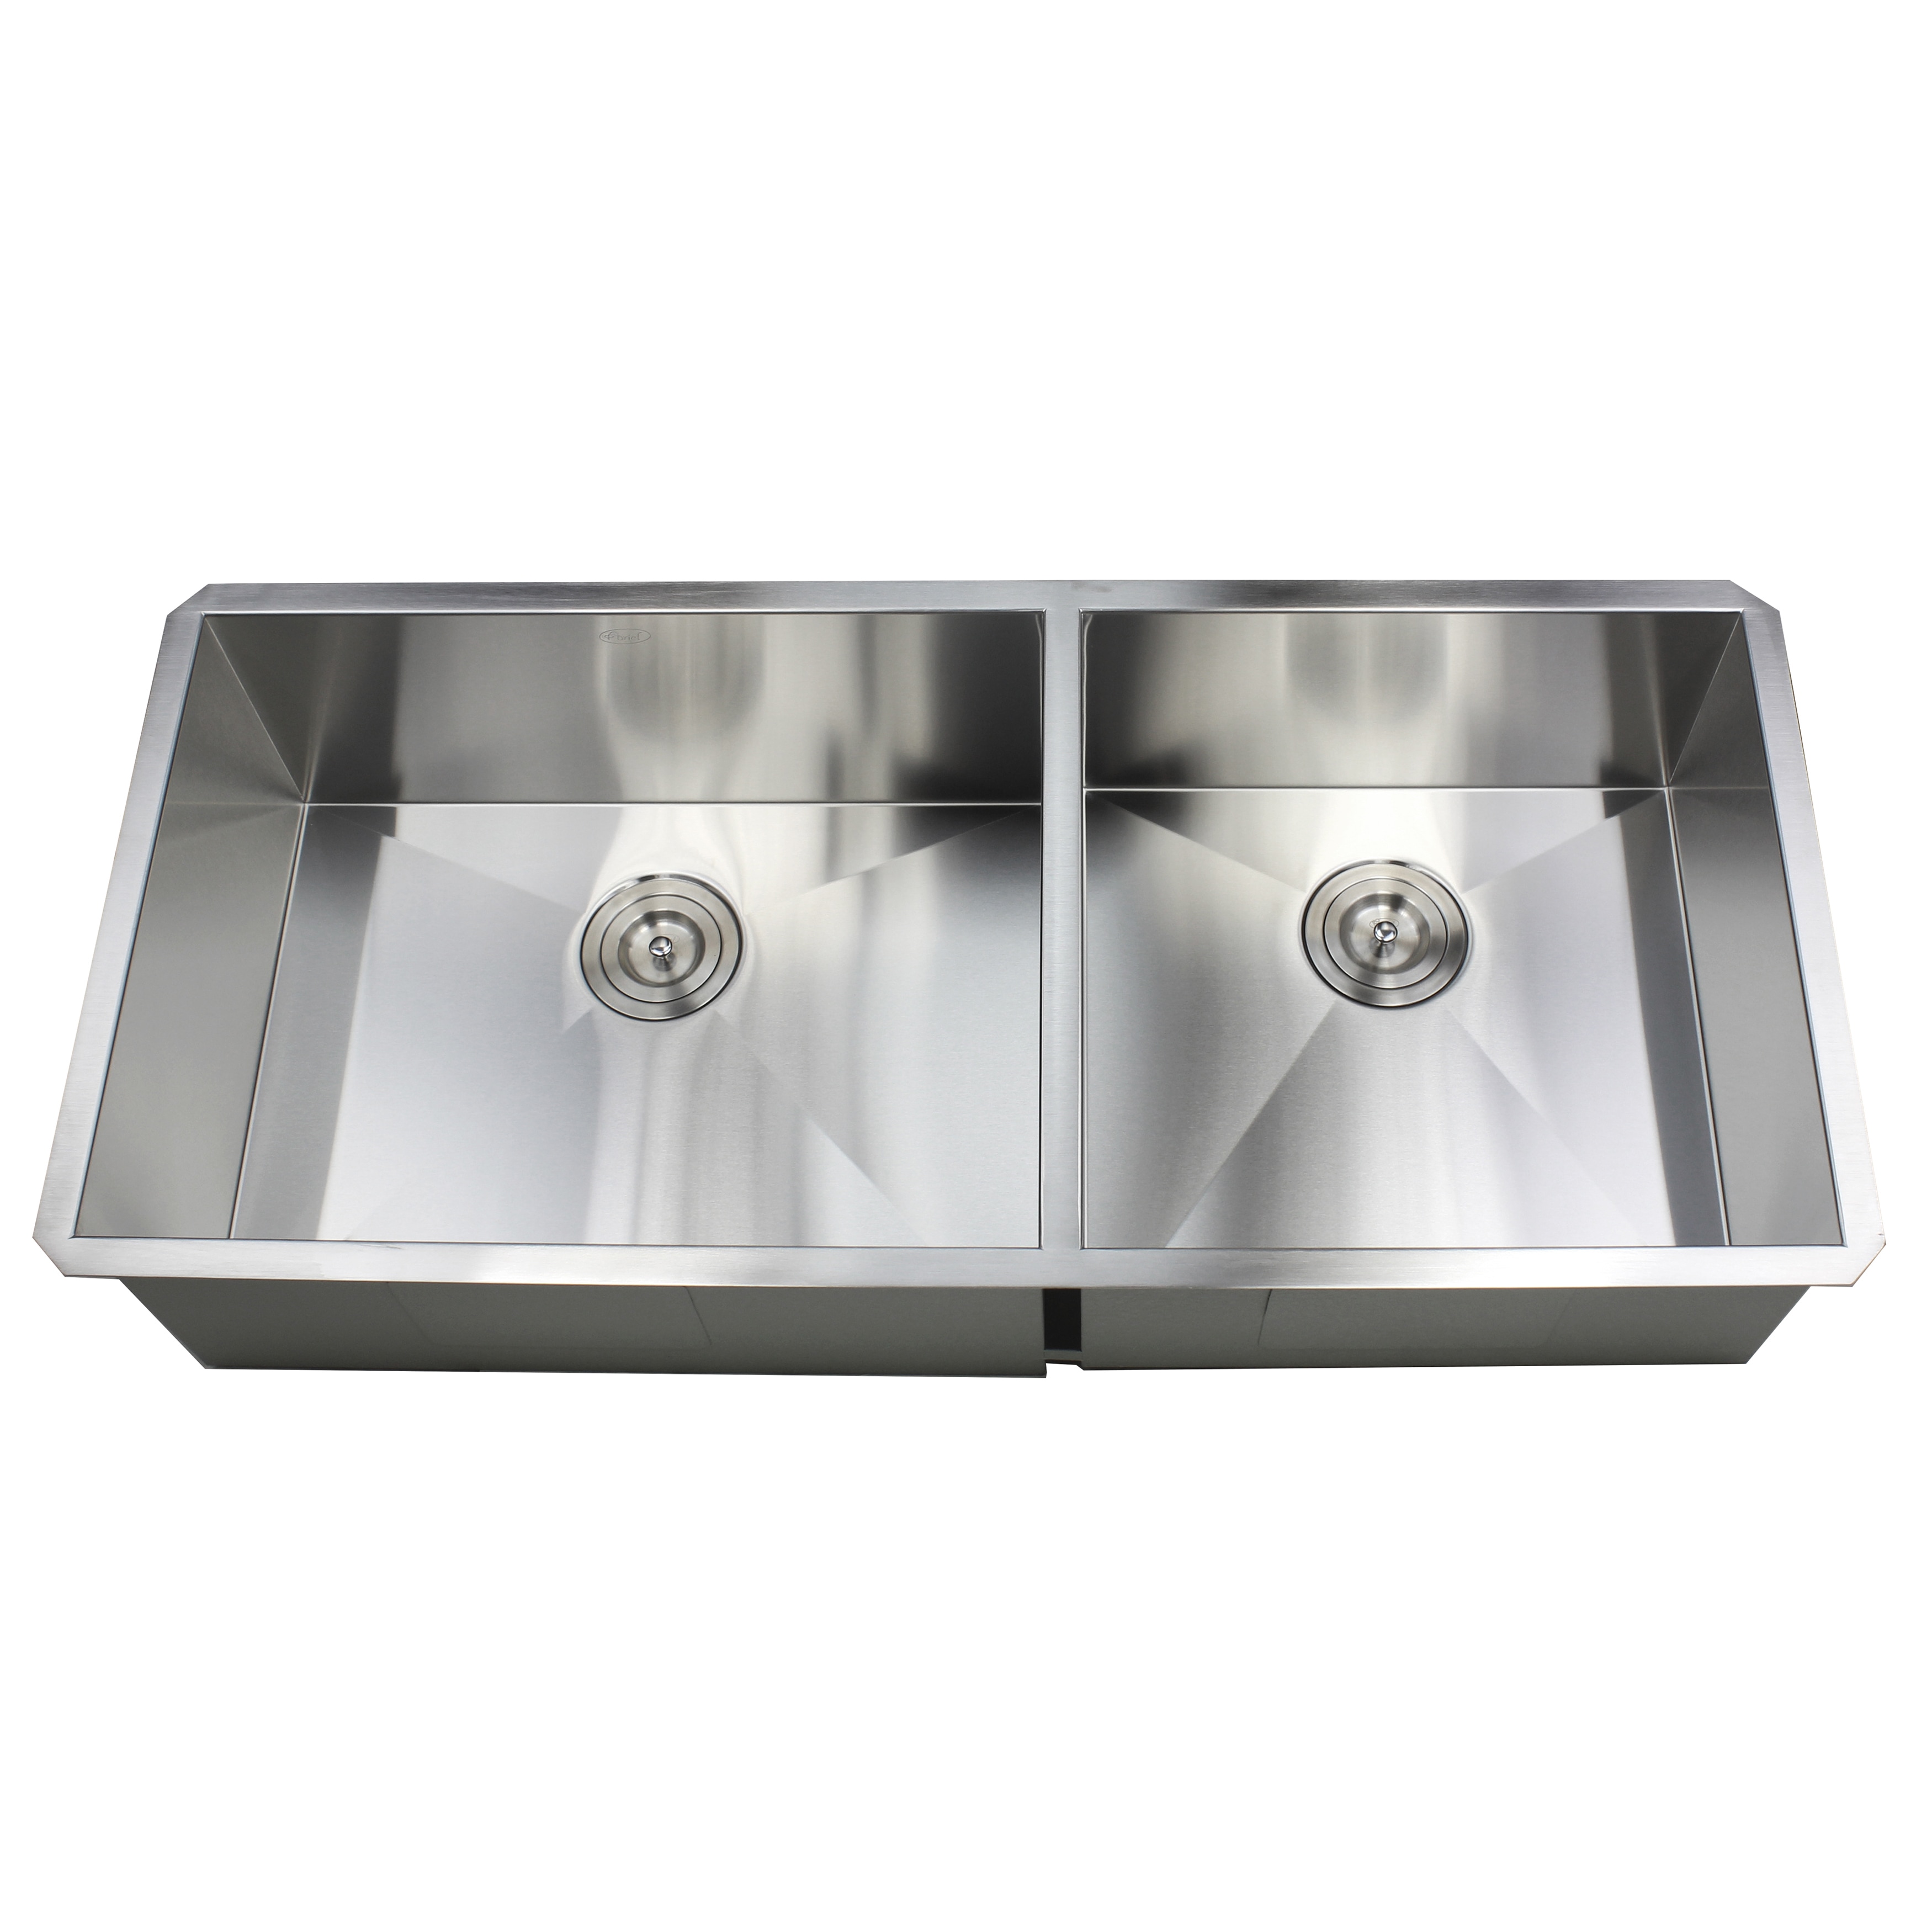 Double Bowl 30 Inch Stainless Steel Undermount Double Bowl